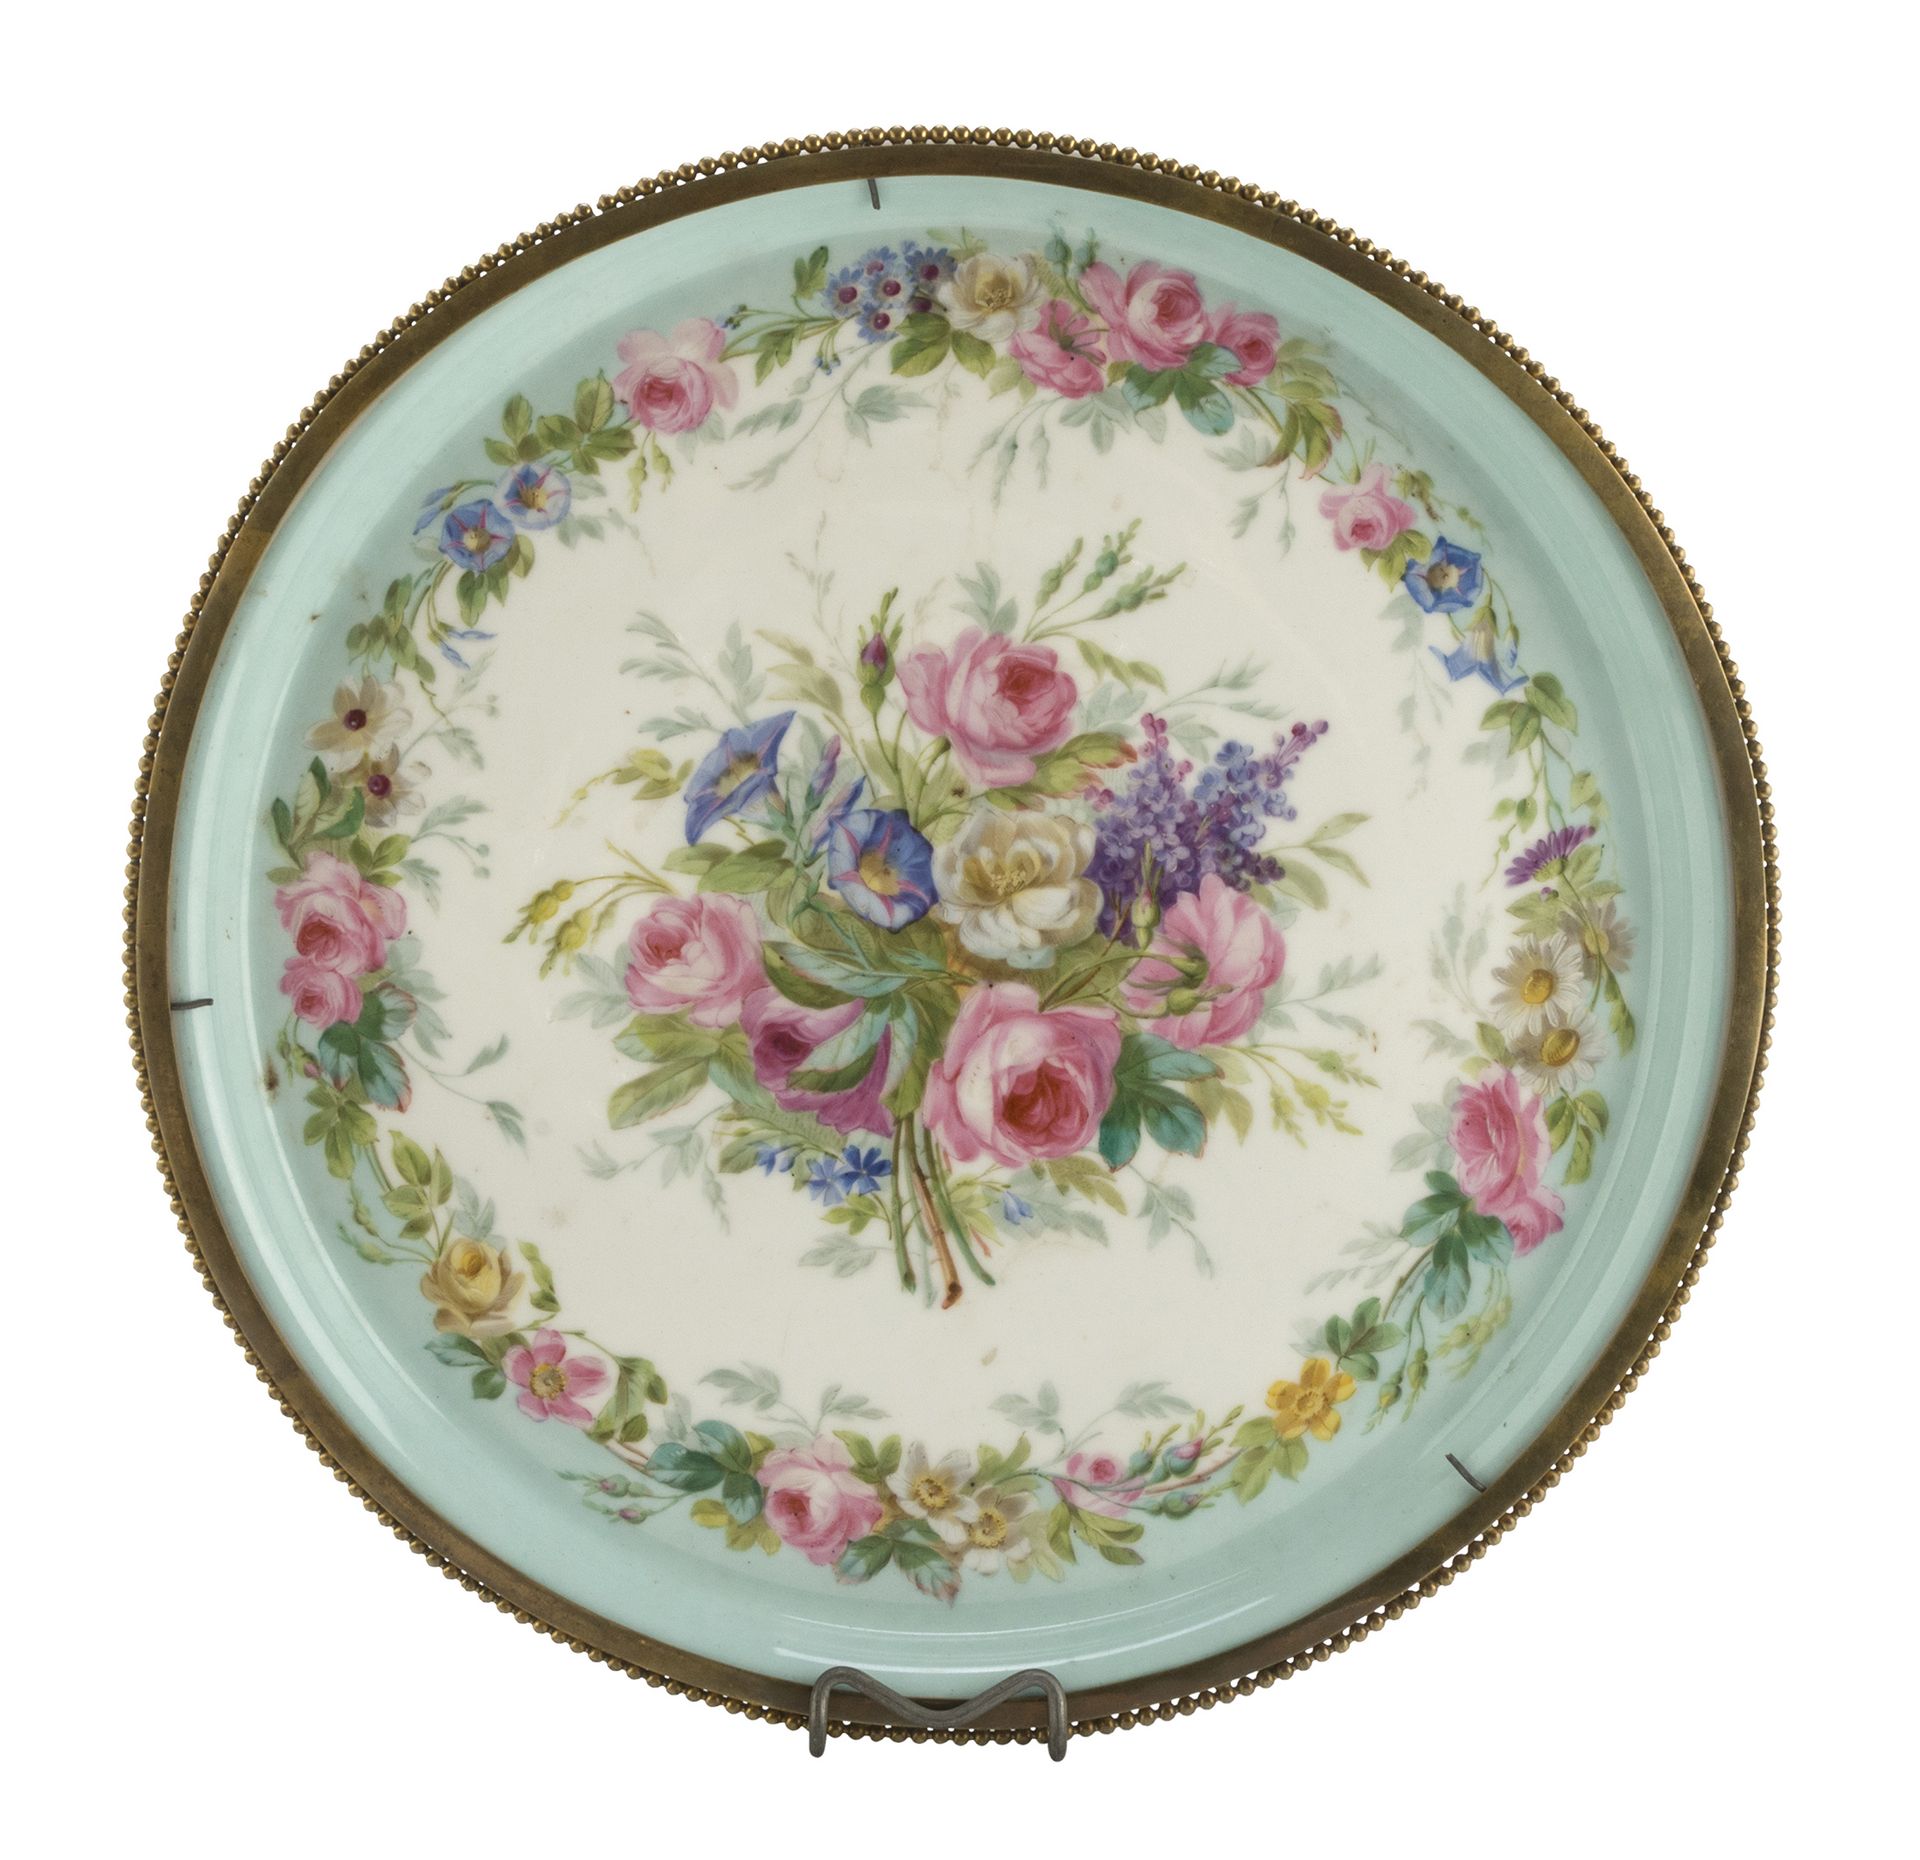 Null PORCELAIN TRAY, LATE 19th CENTURY